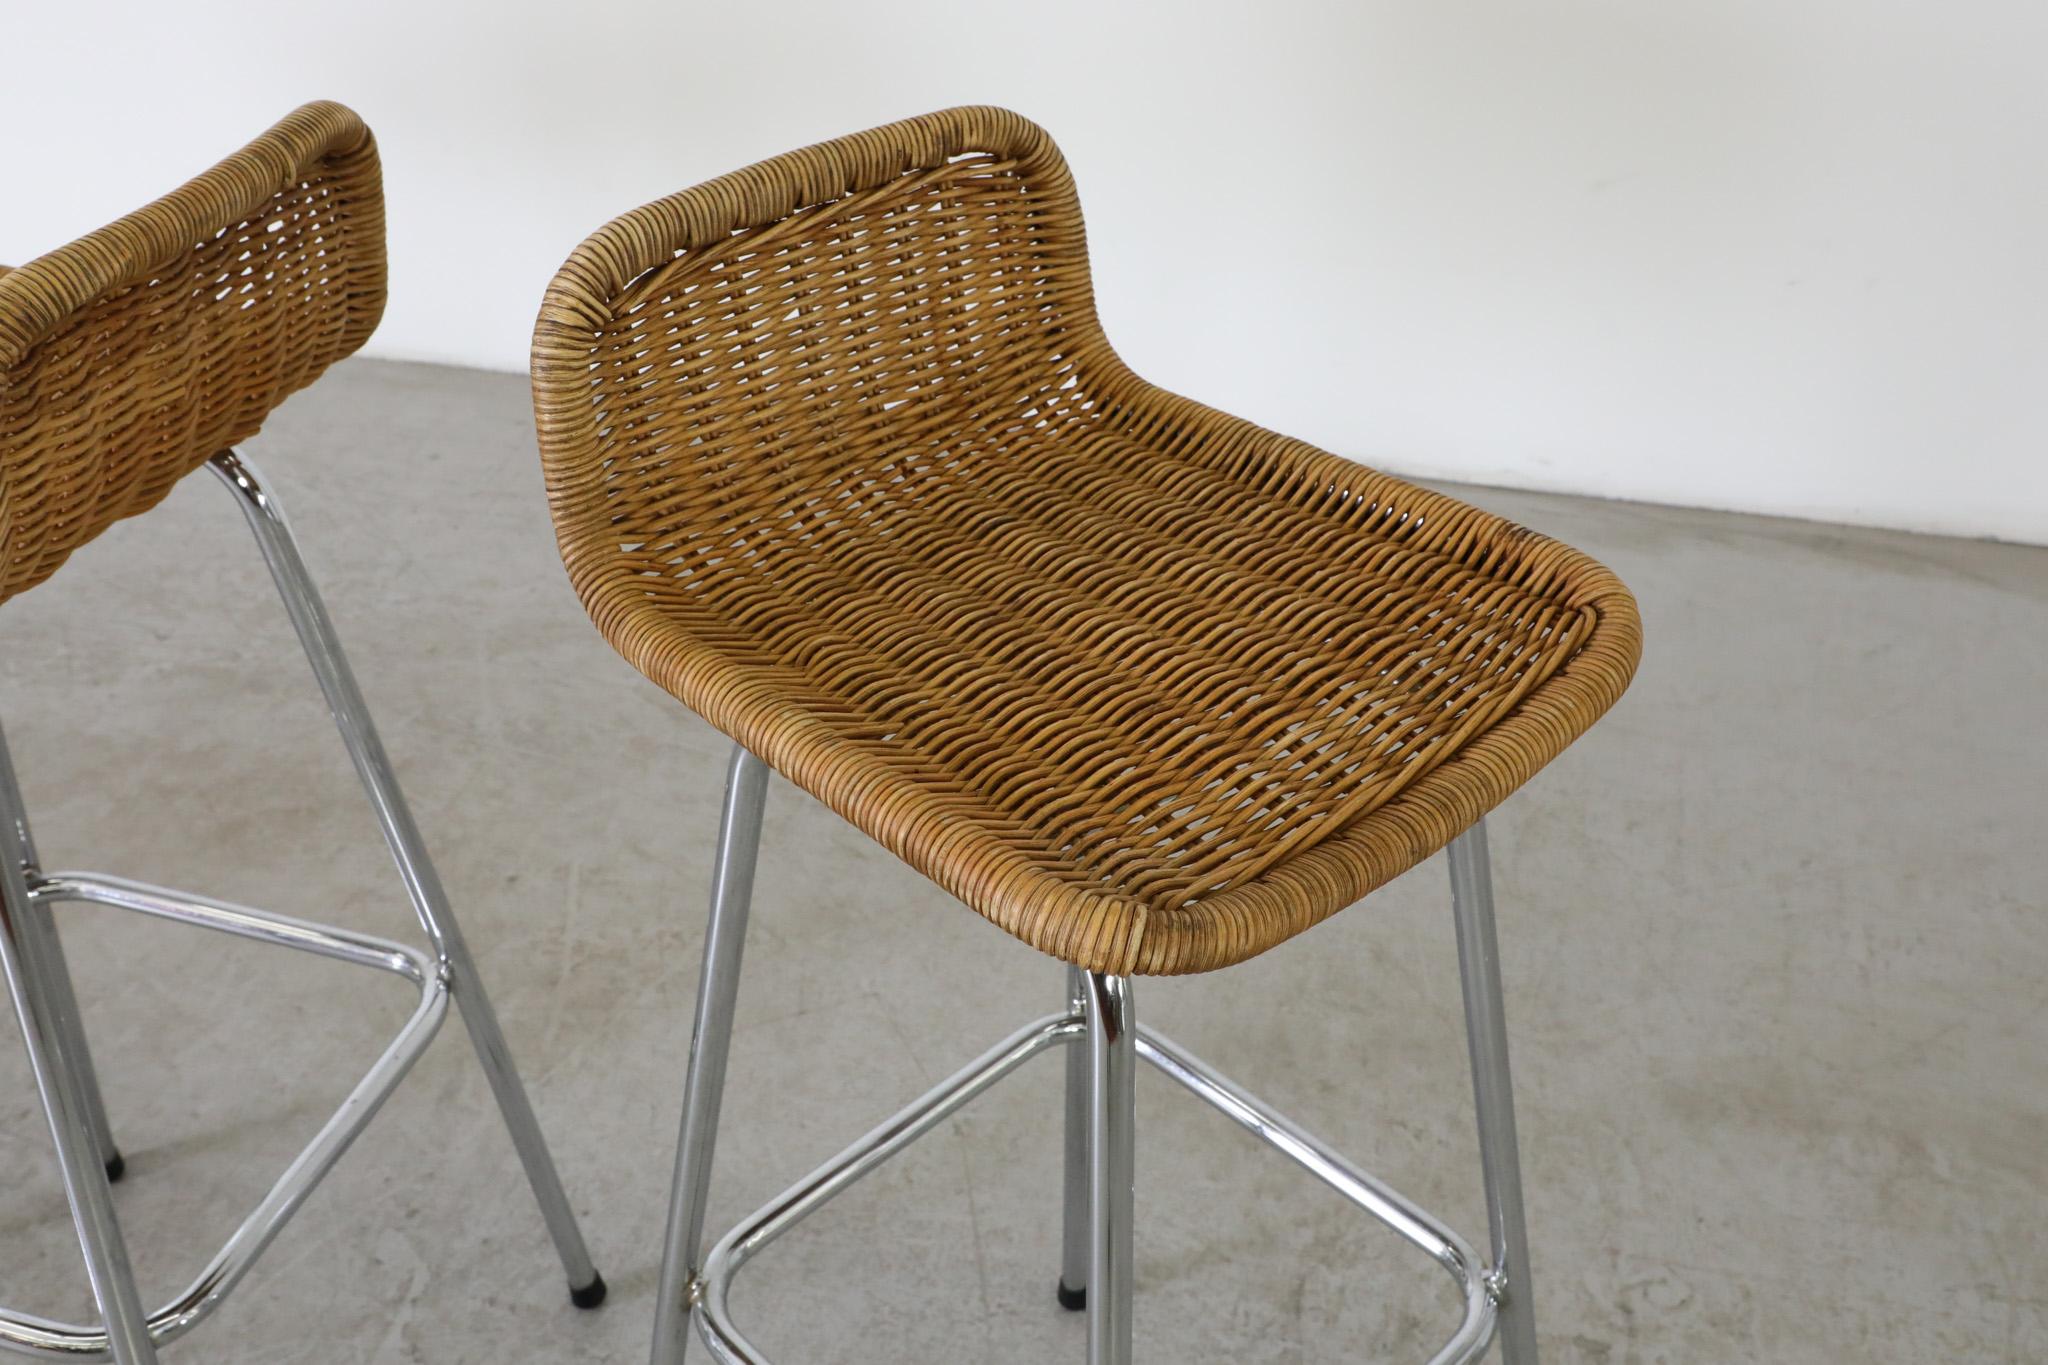 Set of 4 Charlotte Perriand Style Wicker Bar Stools with Chrome Legs In Good Condition For Sale In Los Angeles, CA